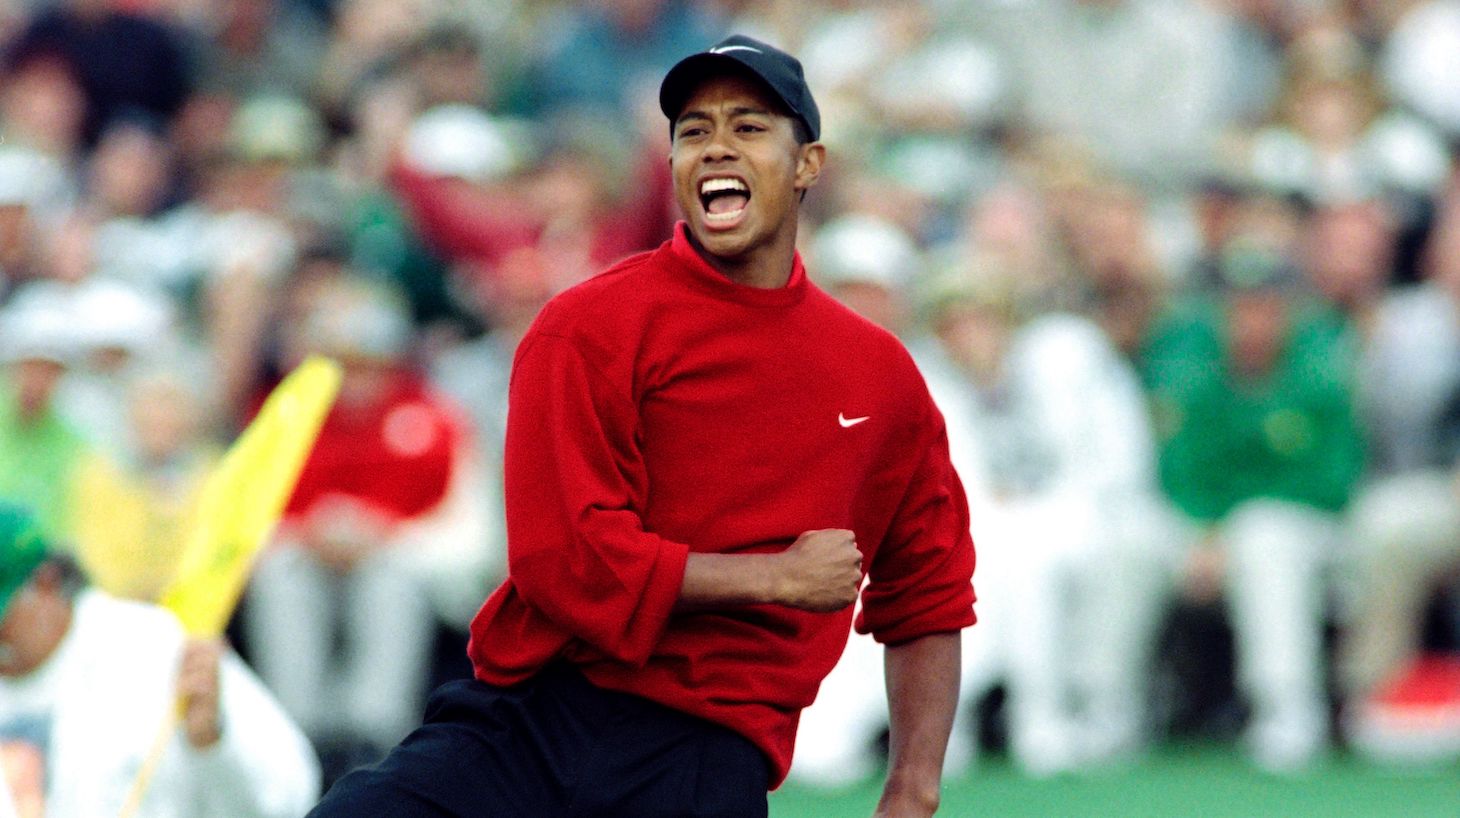 Tiger Woods celebrates on the eighteenth green after winning the 1997 Masters tournament at Augusta National Golf Club in Georgia, on April 13 1997. Woods finished with a record eighteen-under-par. / AFP PHOTO / Timothy A. CLARY (Photo credit should read TIMOTHY A. CLARY/AFP via Getty Images)